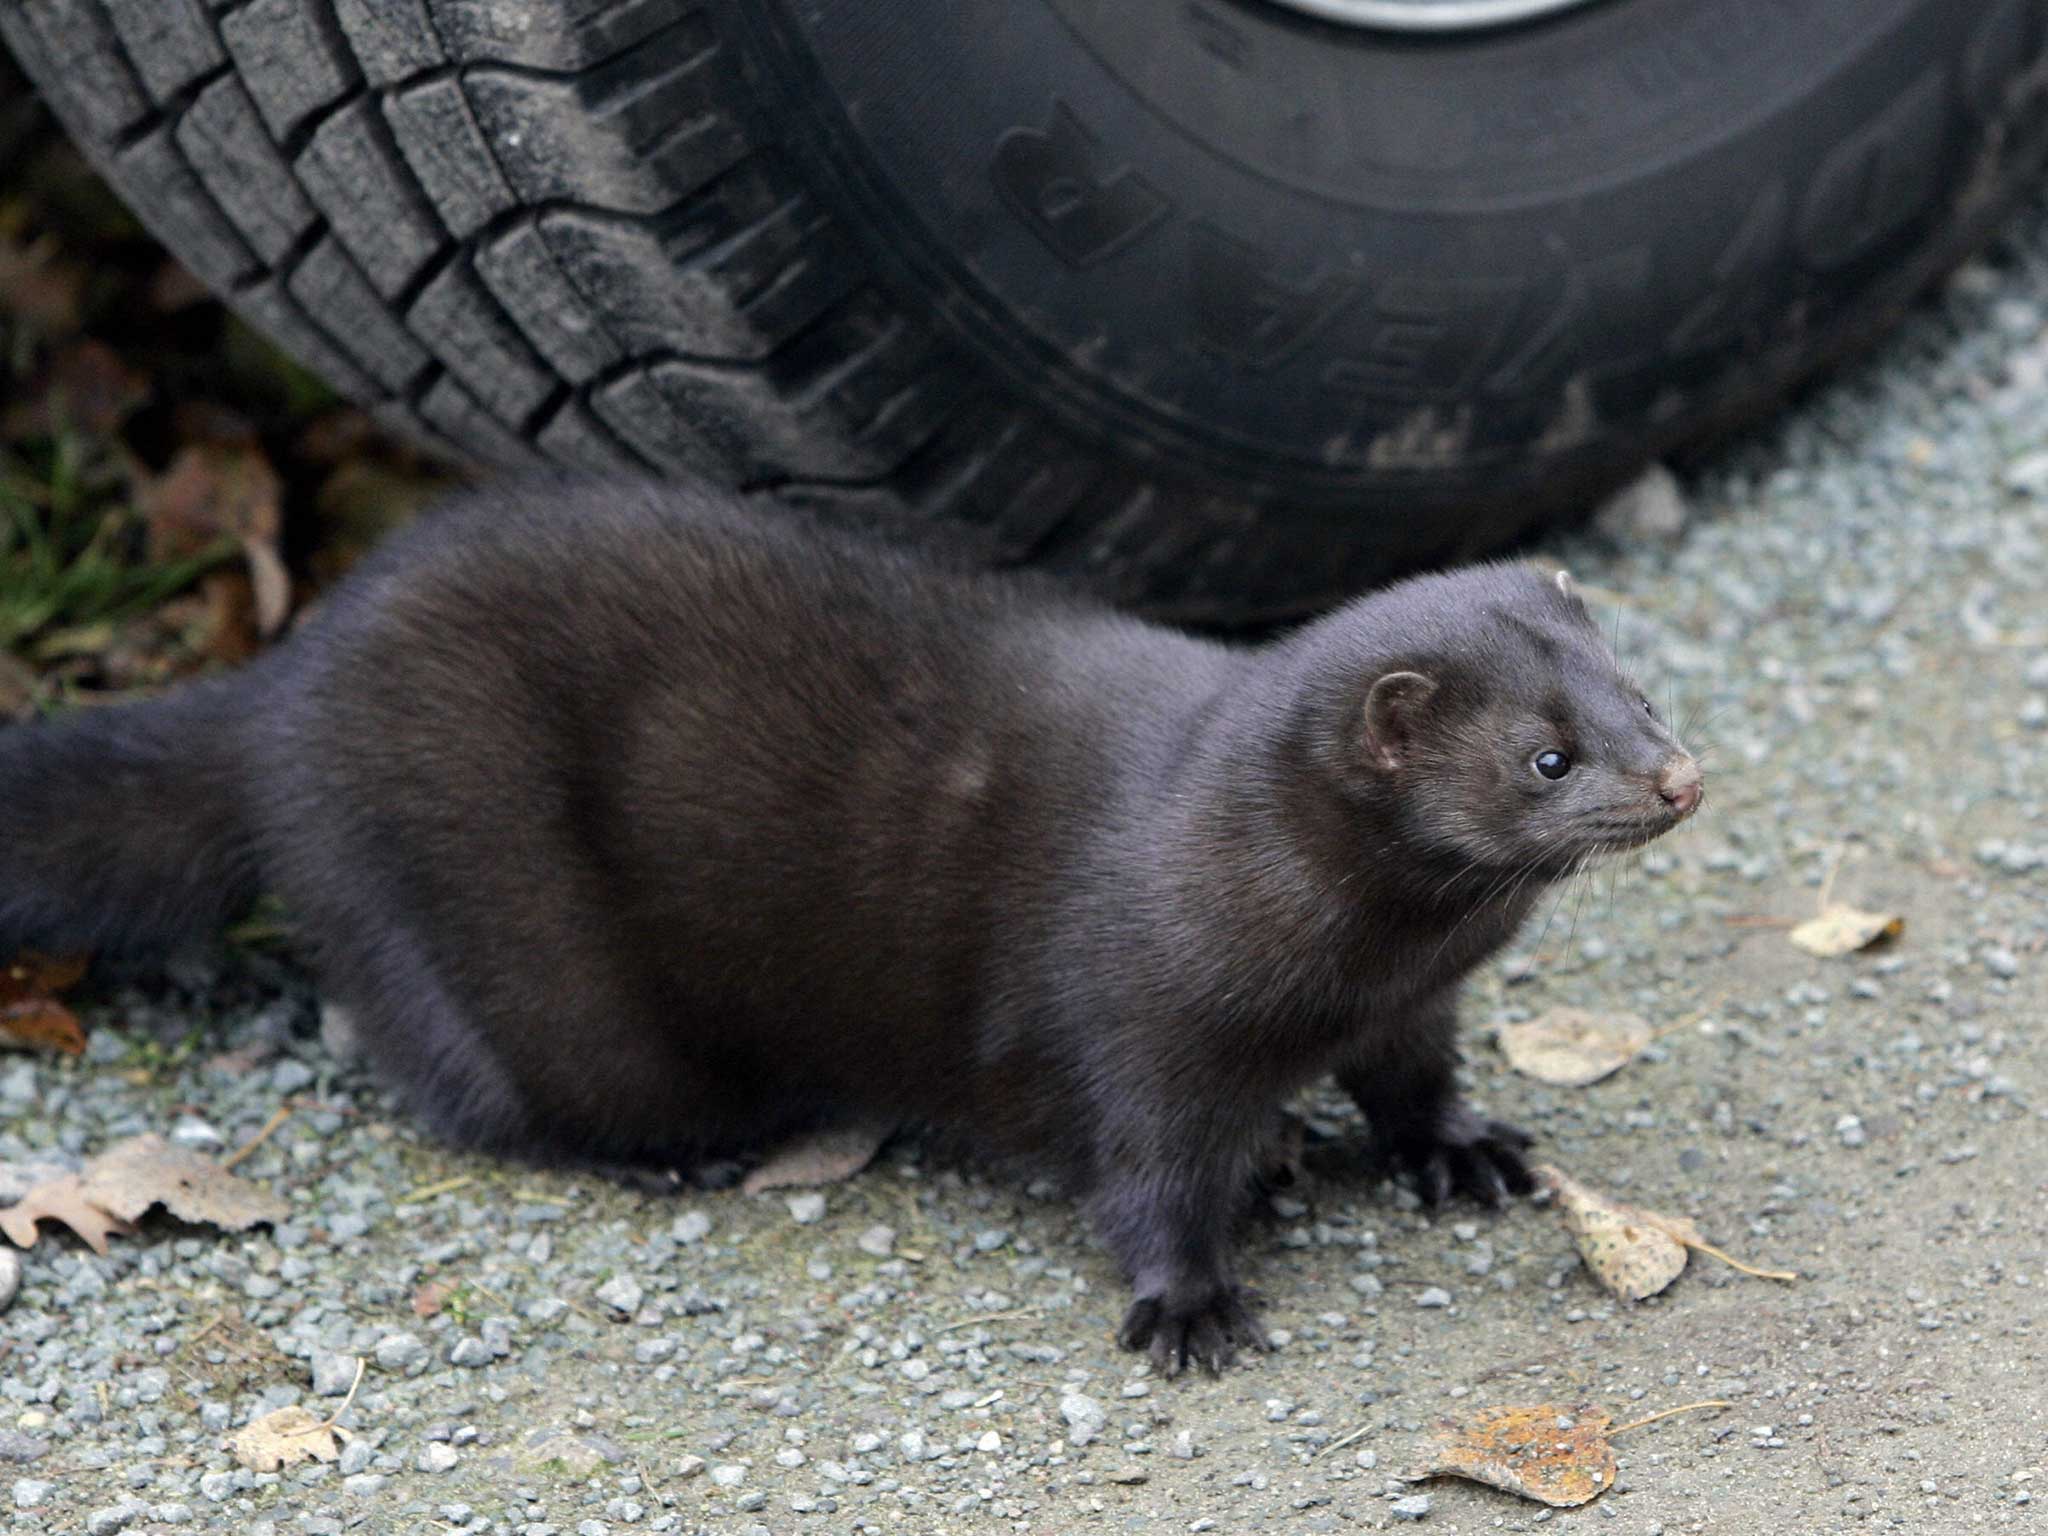 Almost 6,000 of the minks were freed across the US